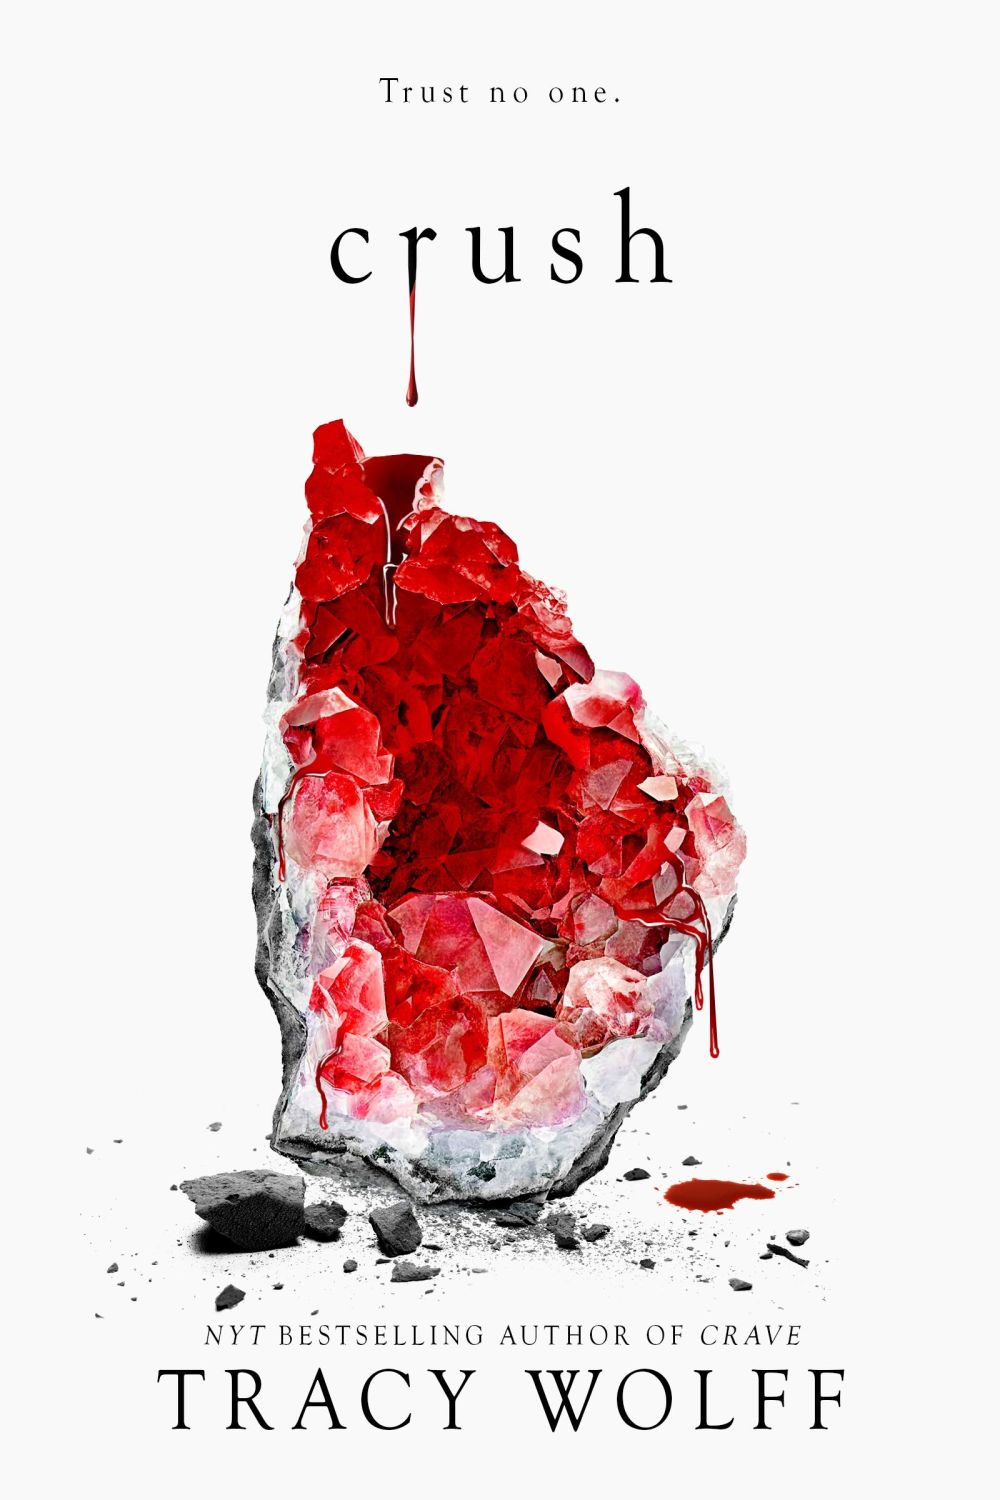 'Crush' by Tracy Wolff (Crave #2)